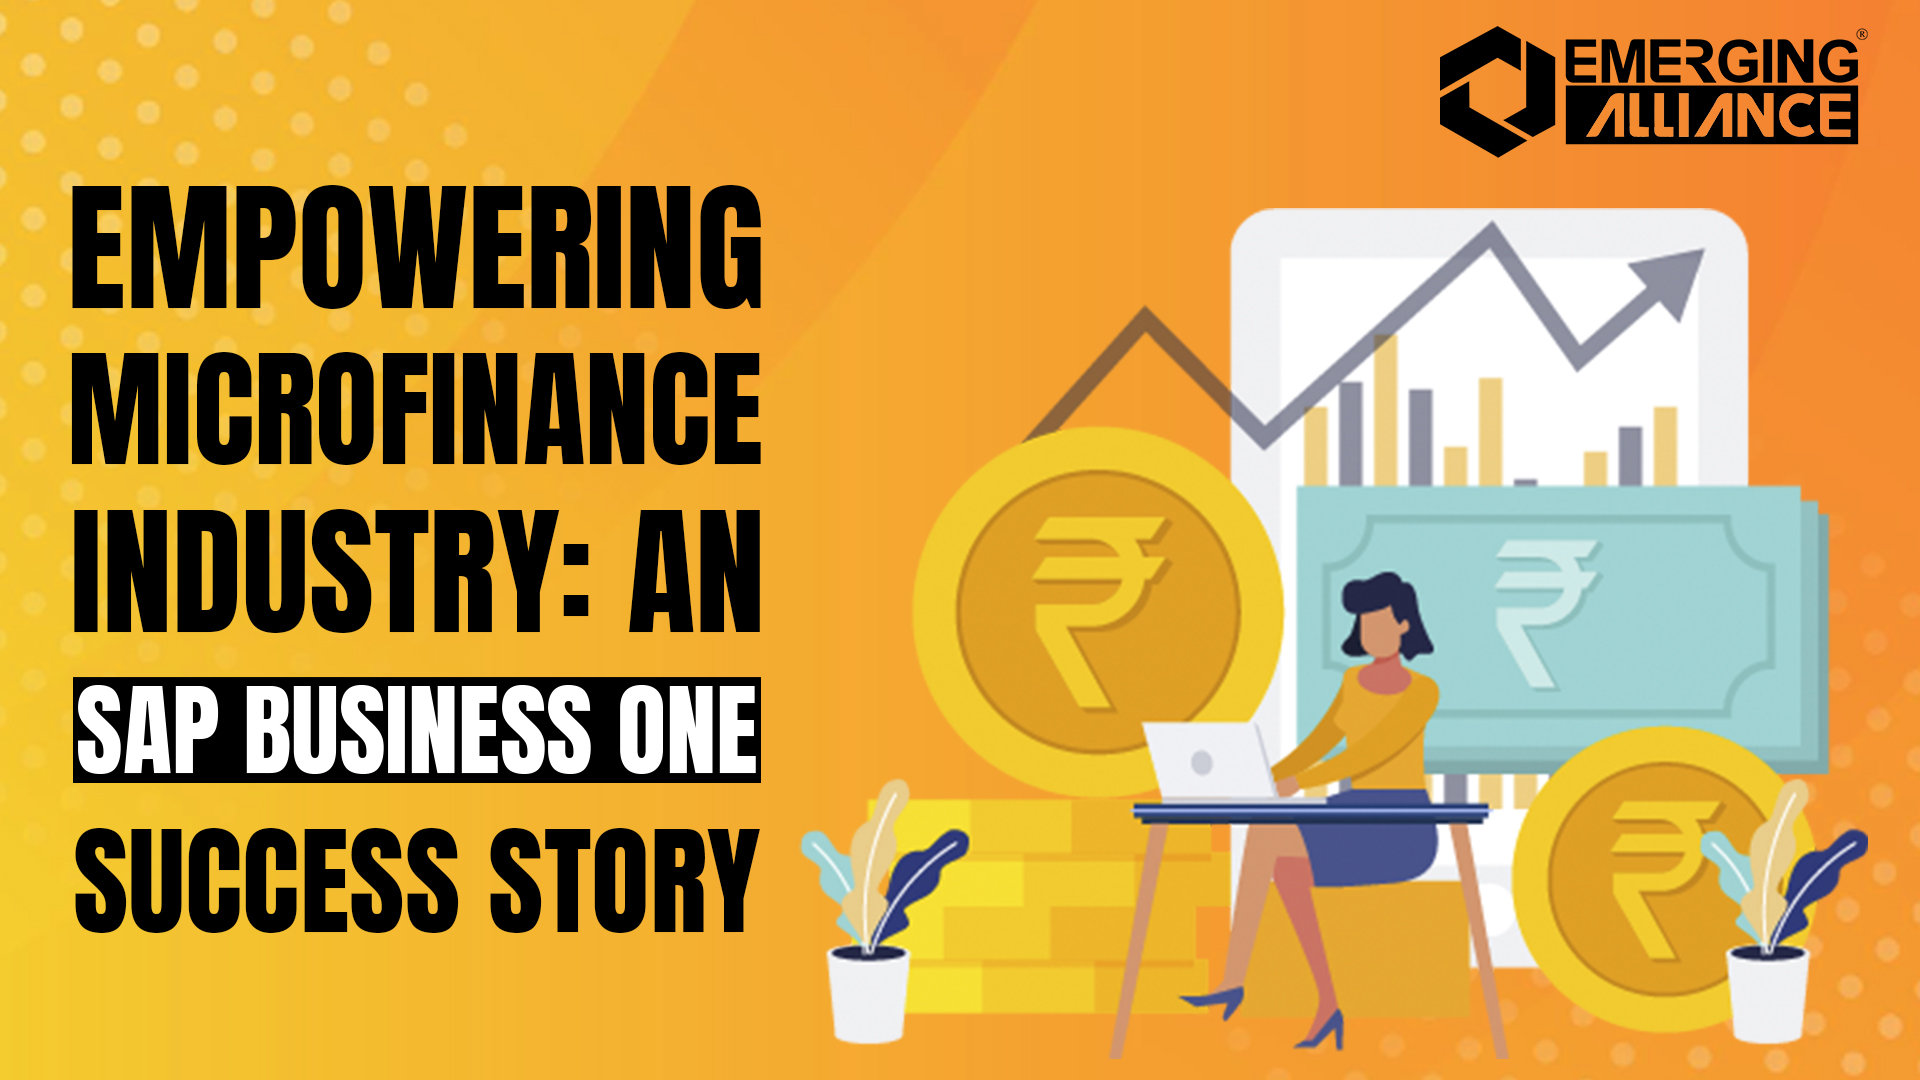 SAP Business with Microfinance Industry